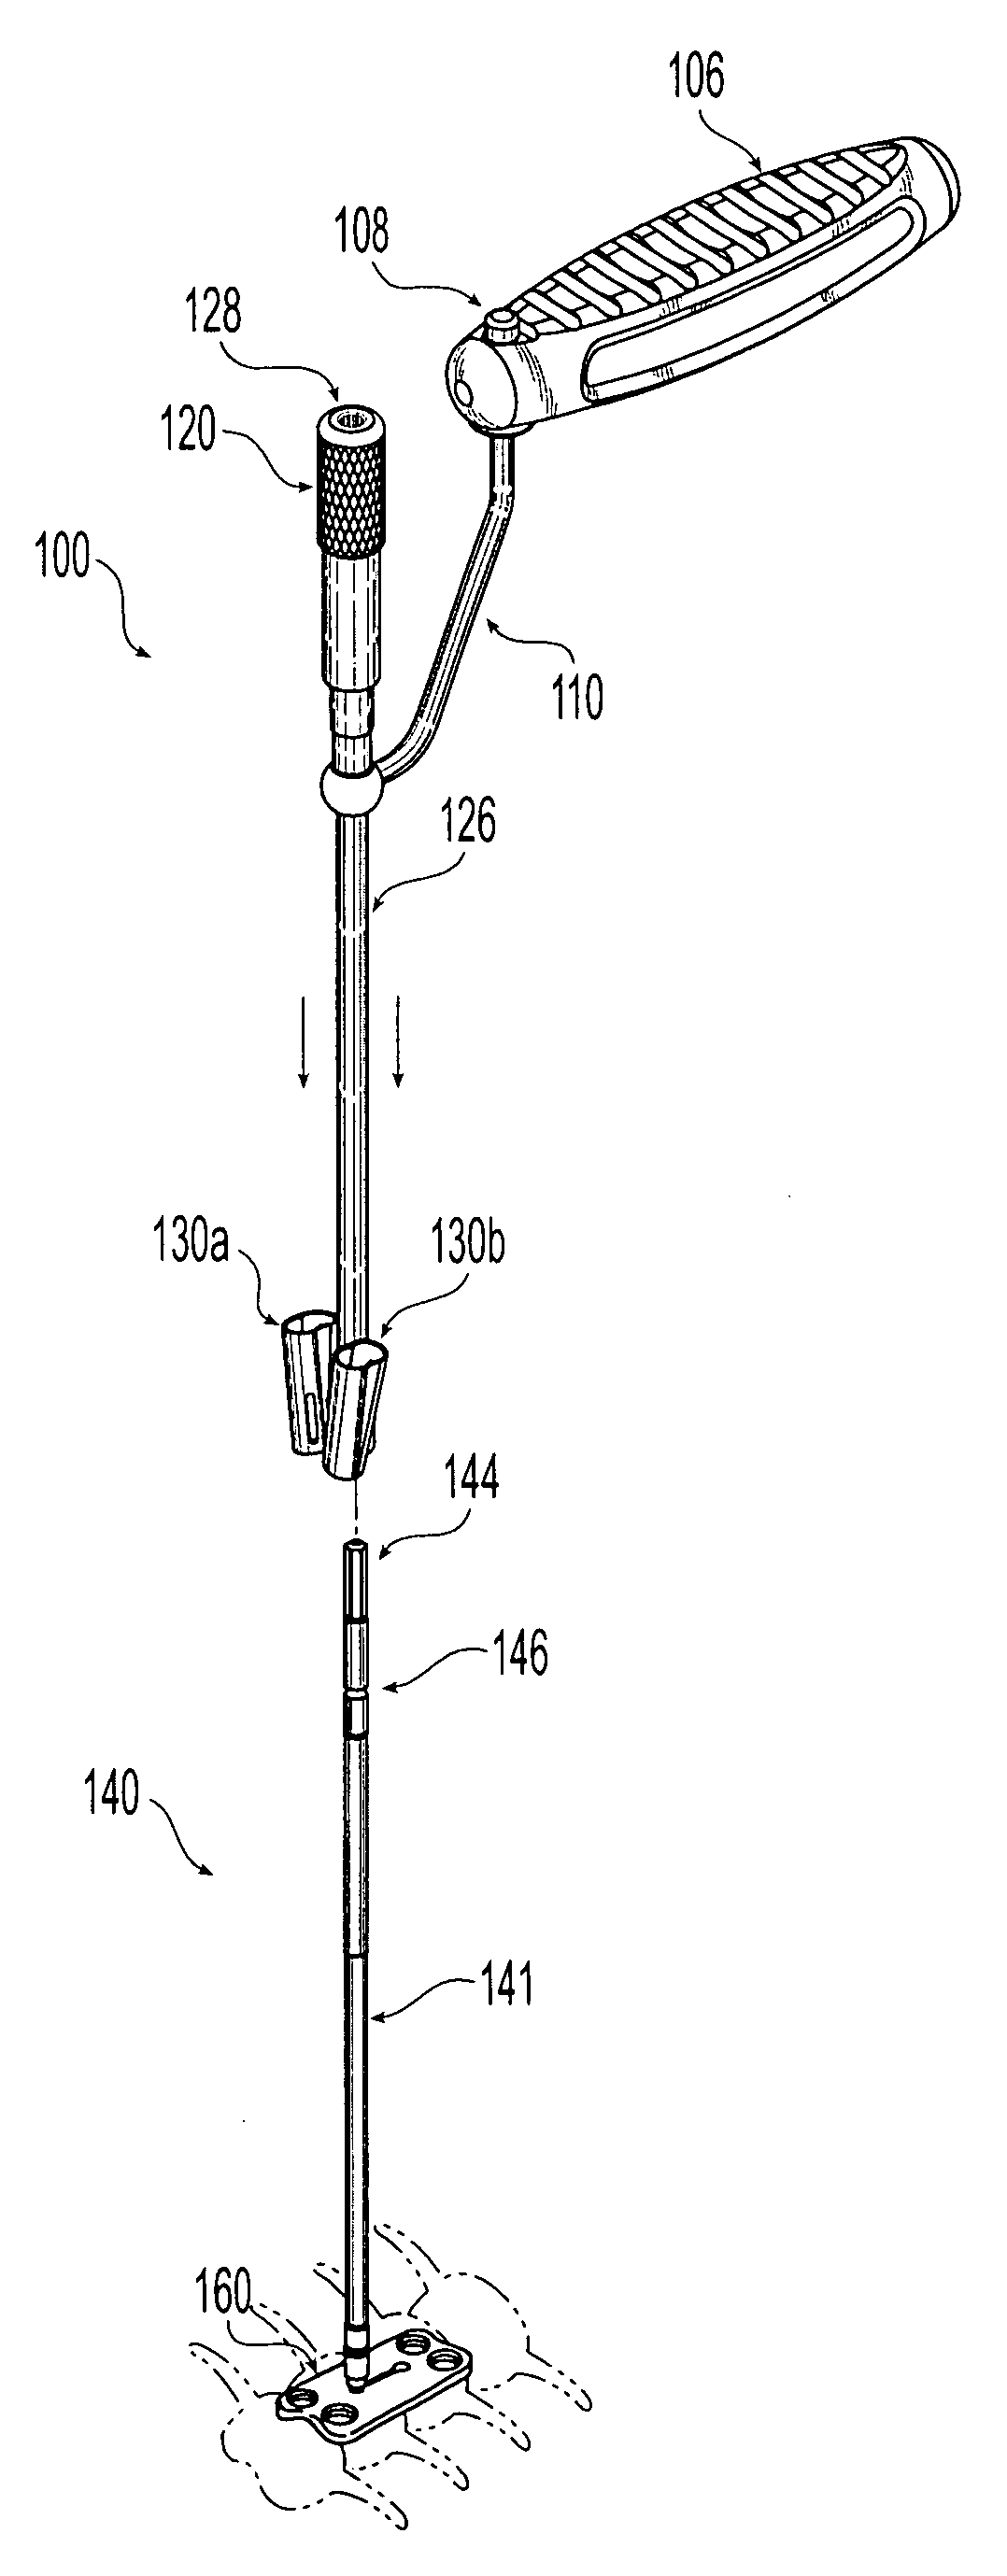 Plating system with multiple function drill guide